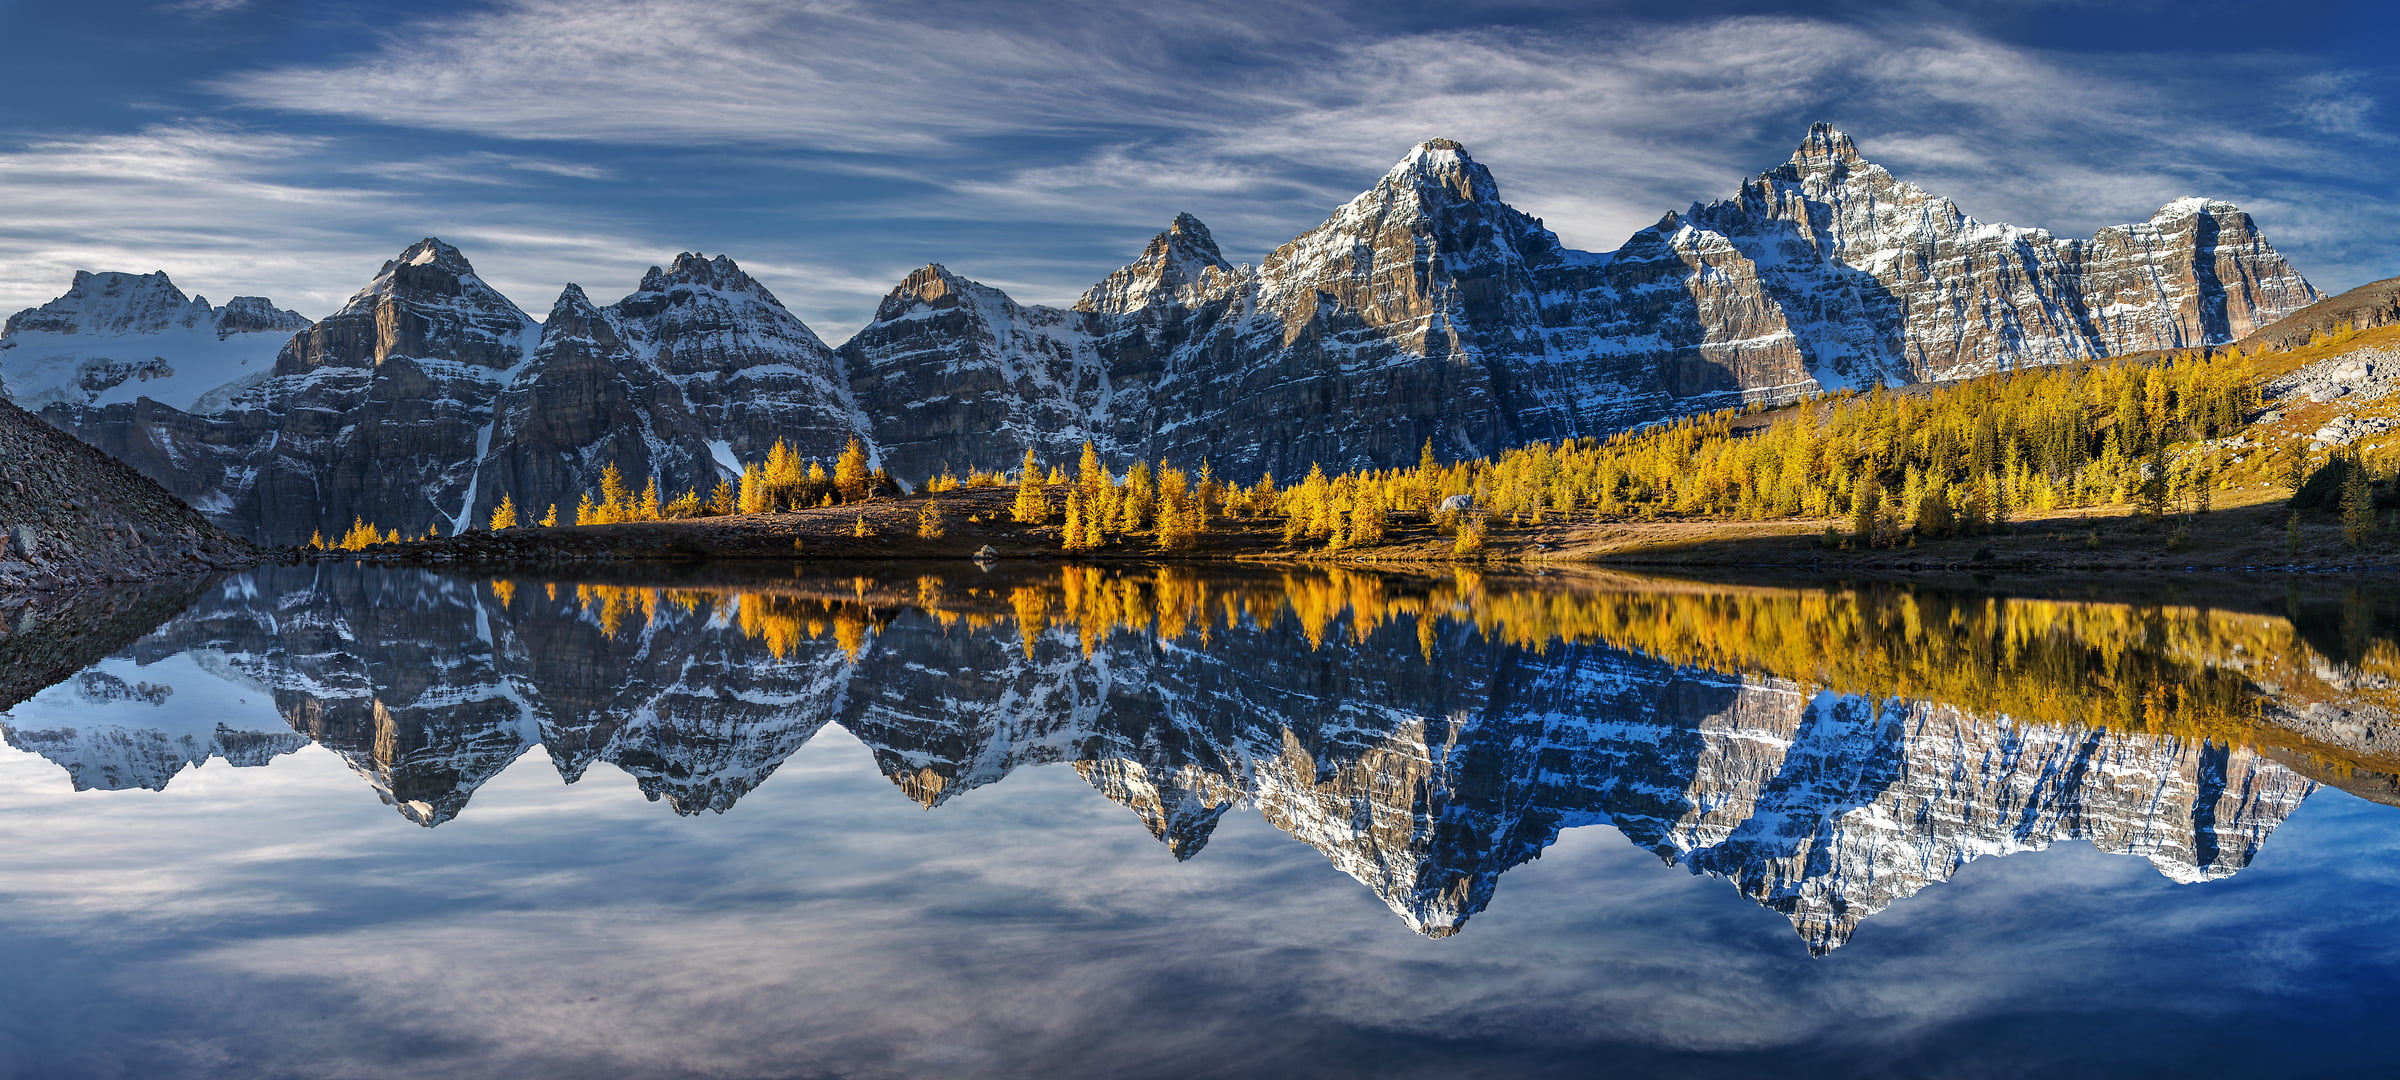 453 megapixels! A very high resolution, large-format VAST photo print of mountains, autumn trees, and a lake with reflection; fine art landscape photo created by Chris Collacott in Banff National Park, Alberta, Canada.